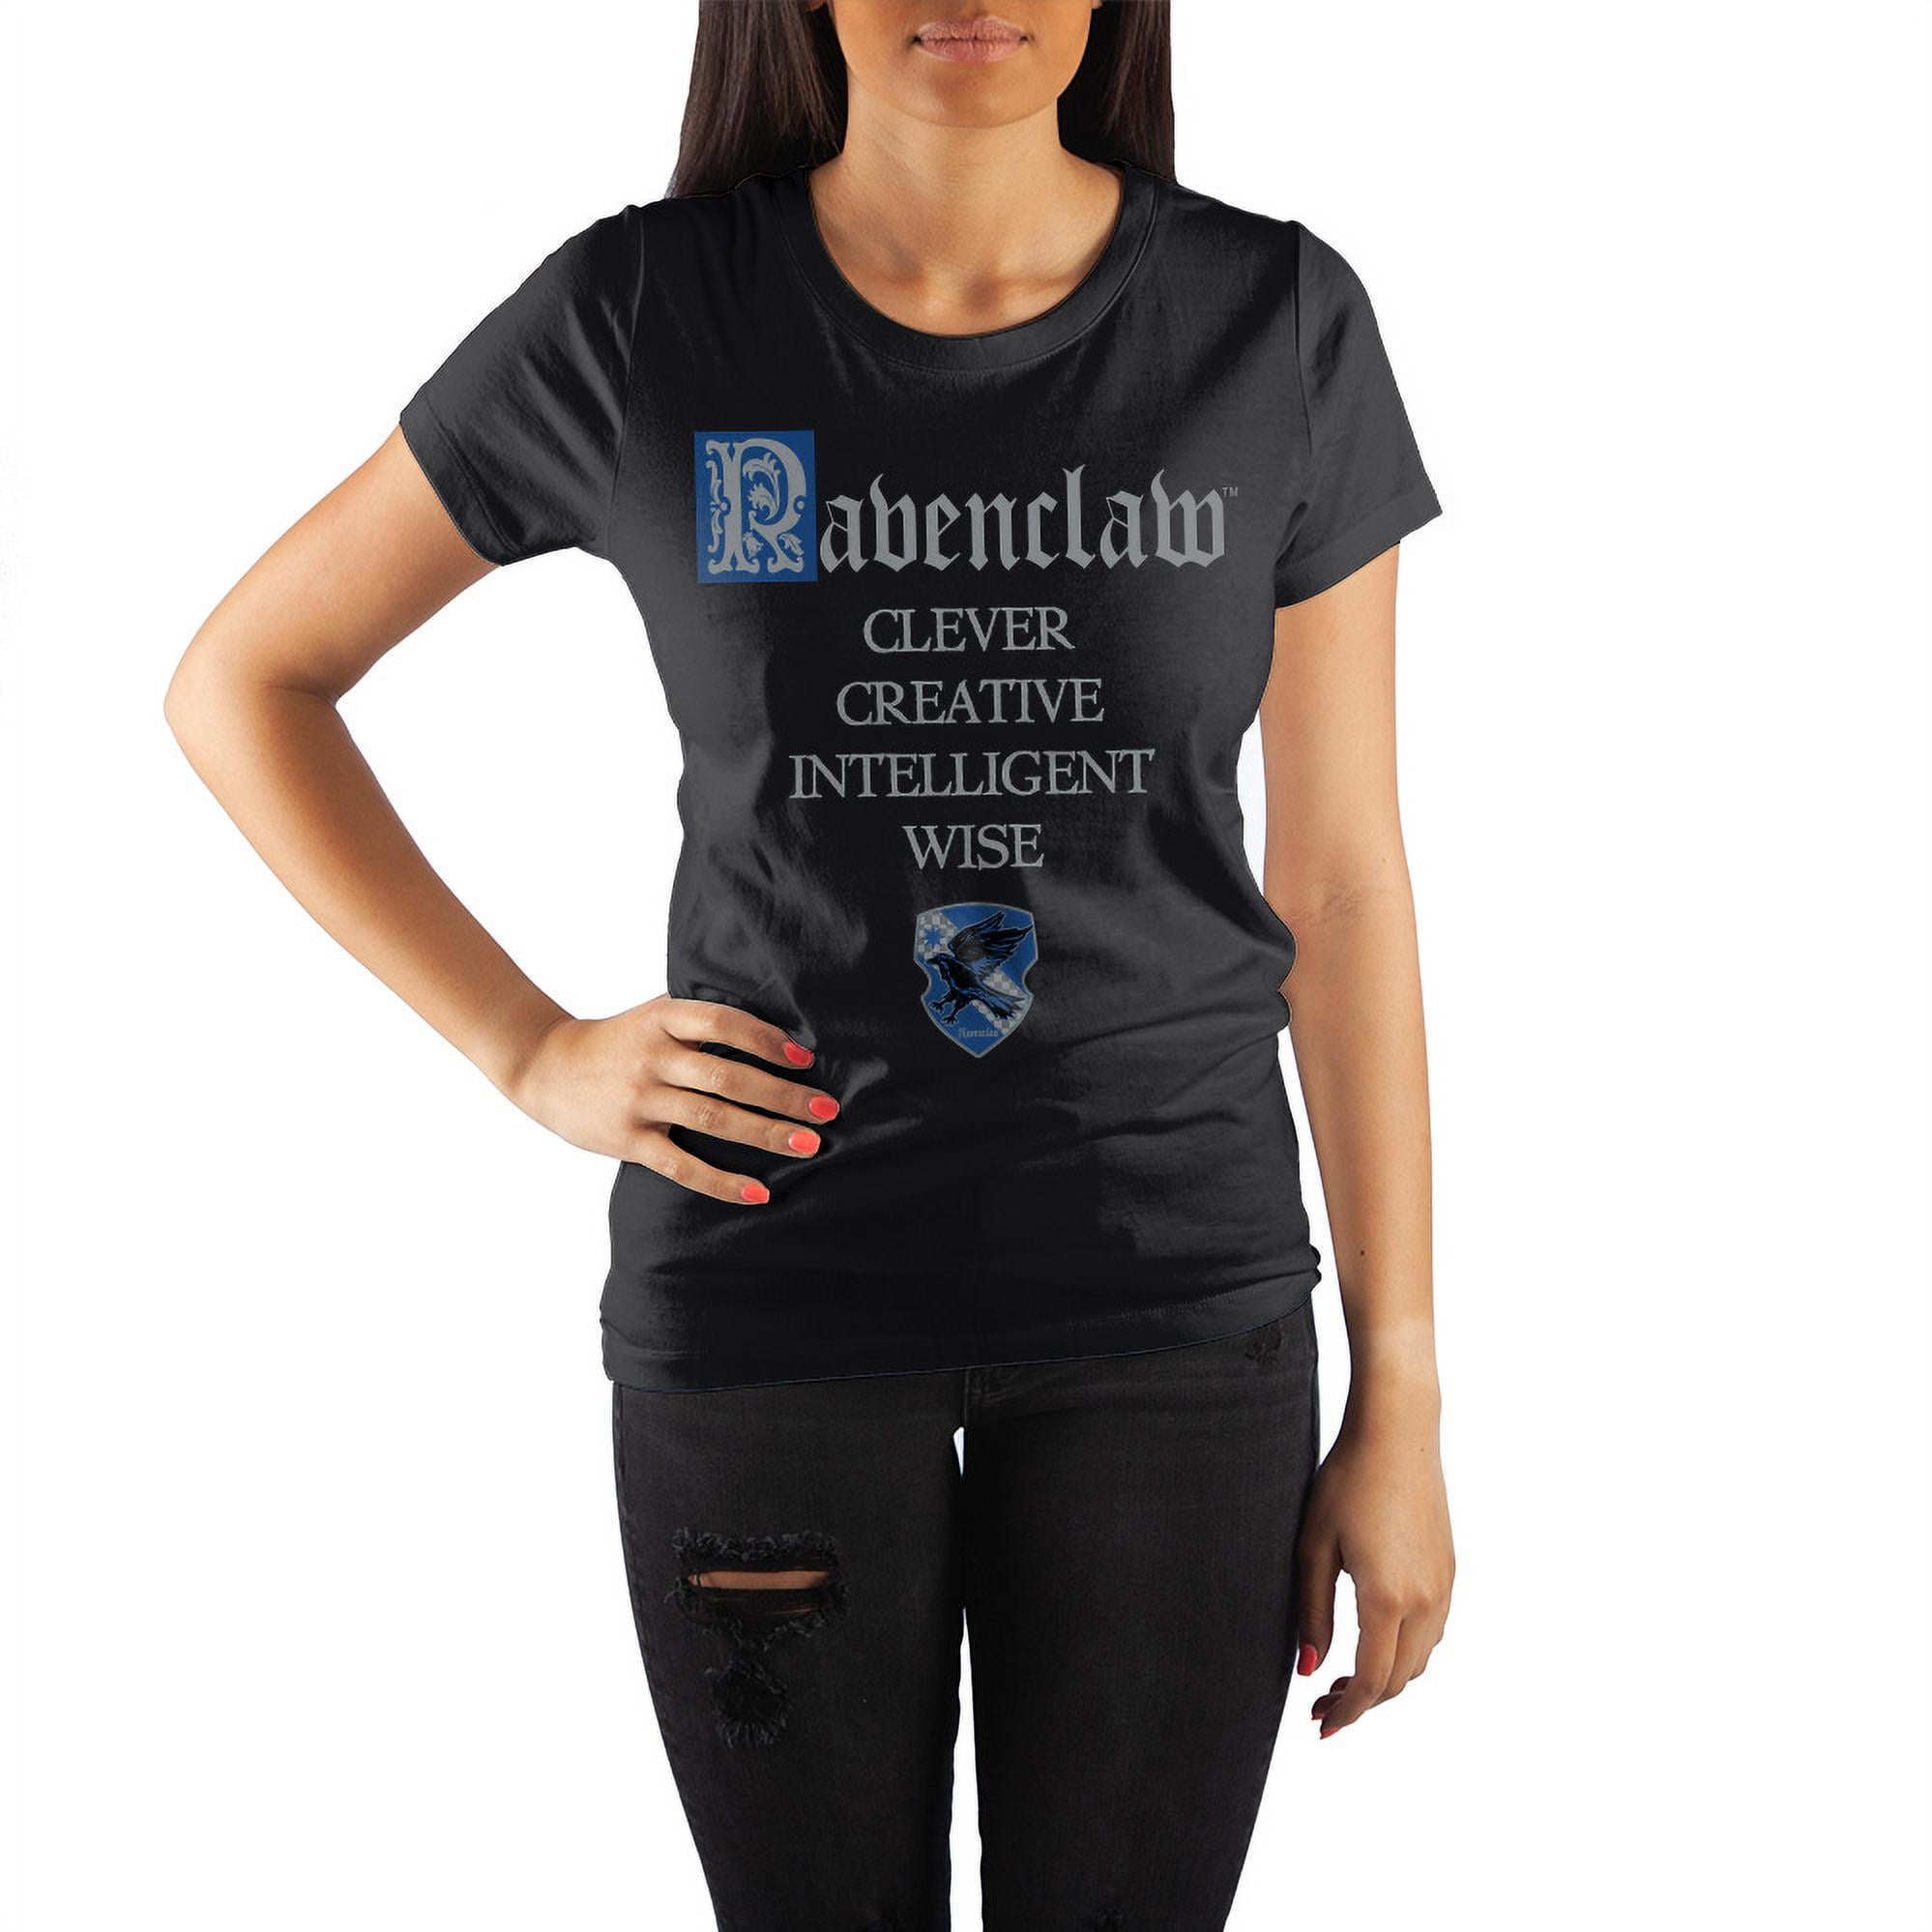 Intelligent Tee Crest Black Wise Creative of Juniors Harry Shirt-Small & Potter House Clever T-Shirt Characteristics Ravenclaw